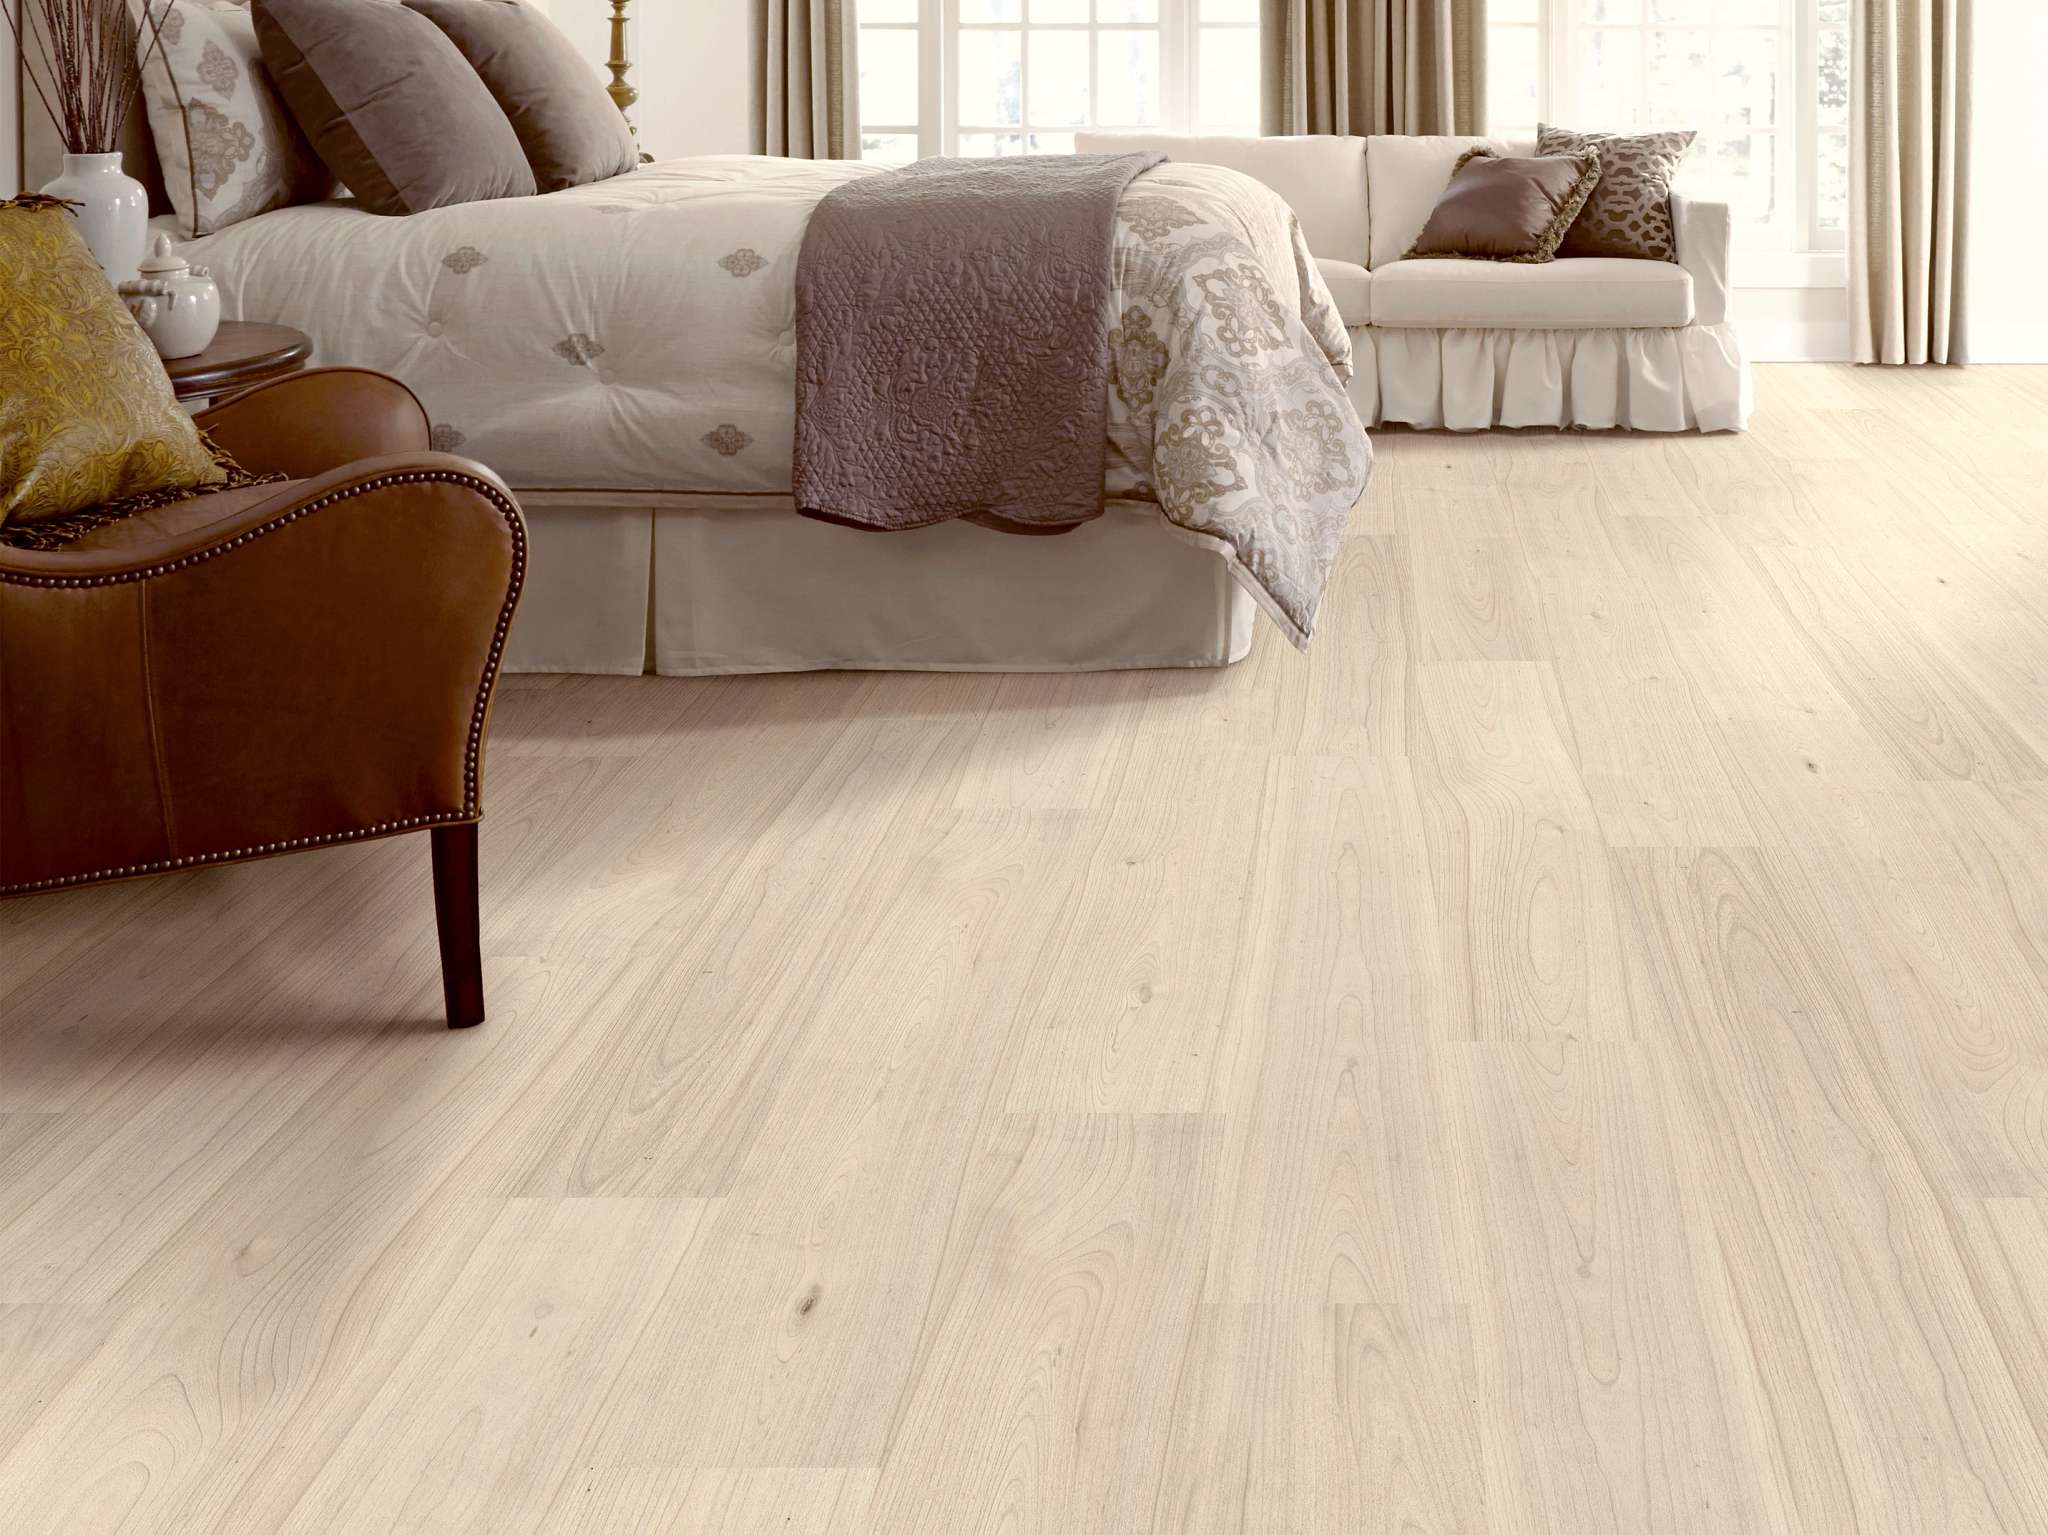 What Are the Benefits to Vinyl Plank Flooring?